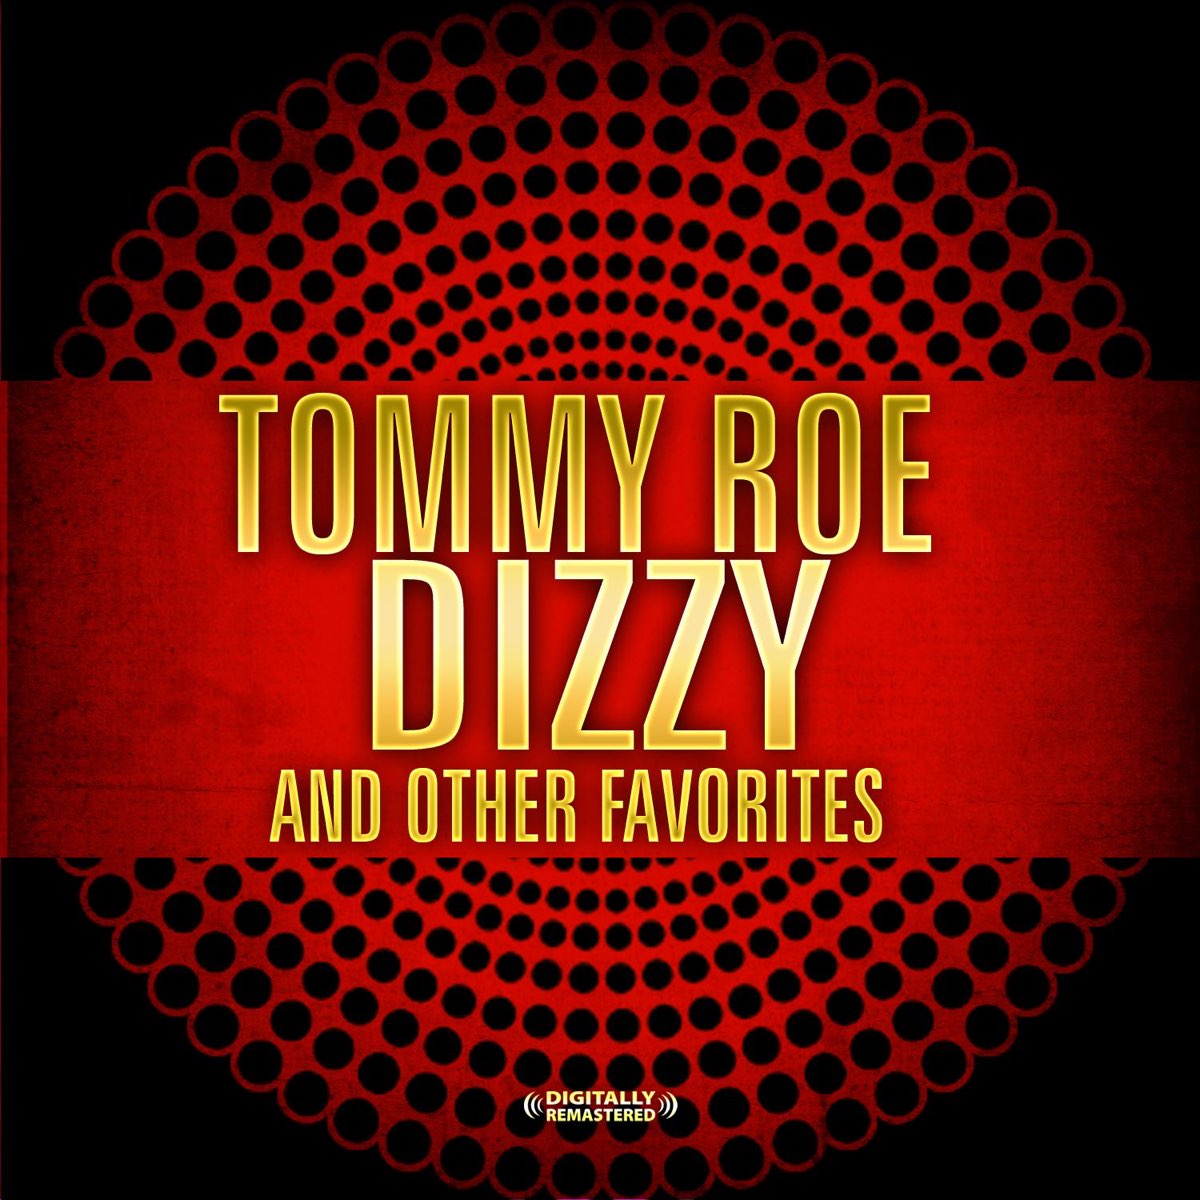 Диски digitally Remastered. Tommy Roe Dizzy 1969 Lyrics. The other favorite